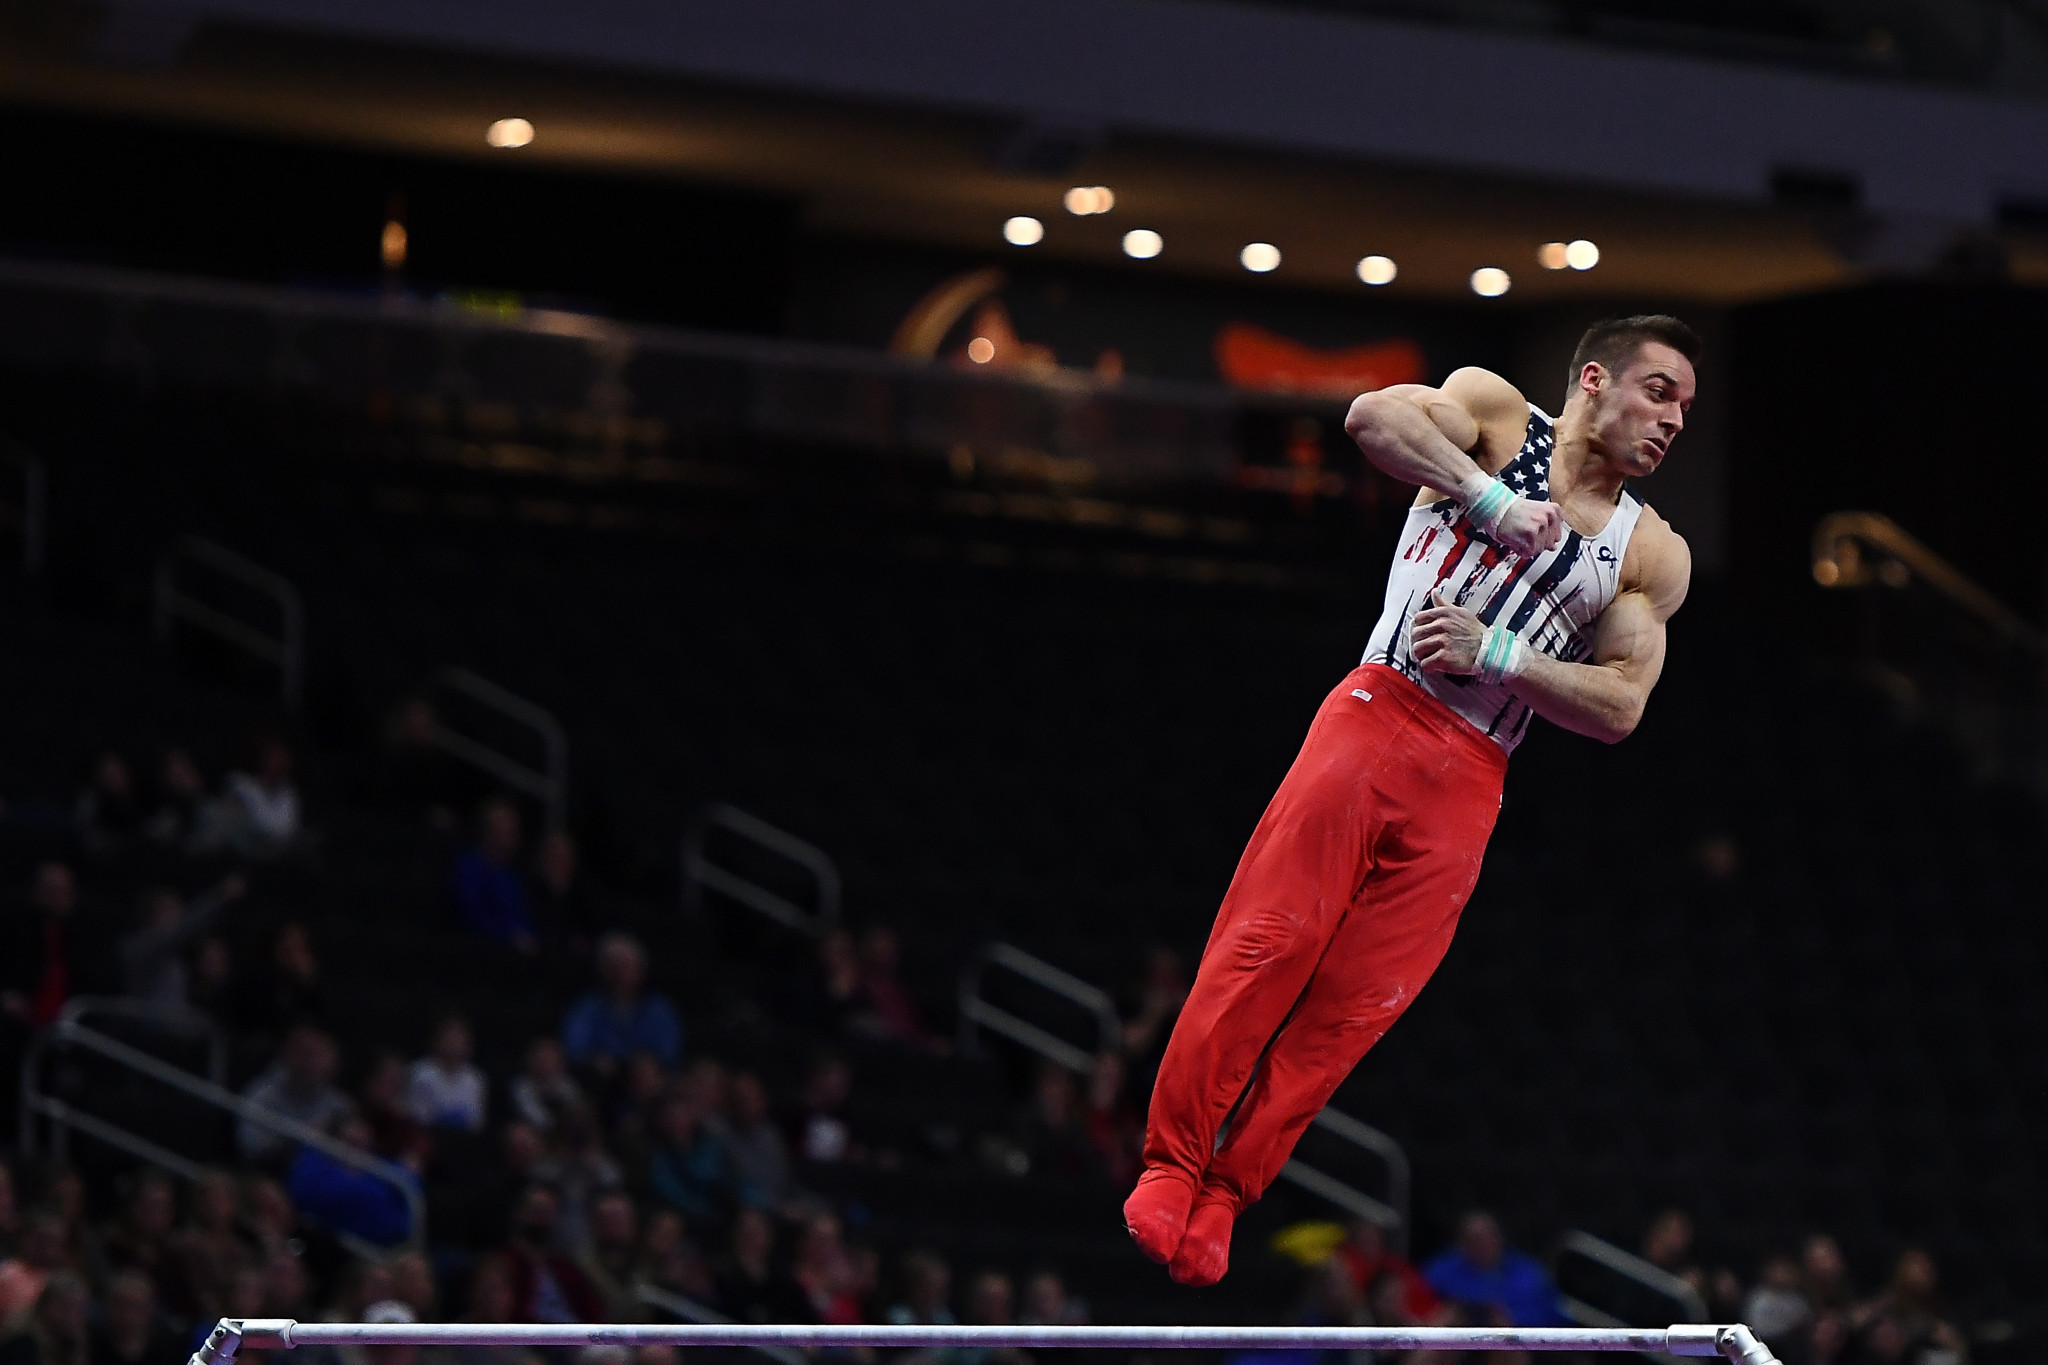 American gymnast Mikulak to retire after Tokyo 2020